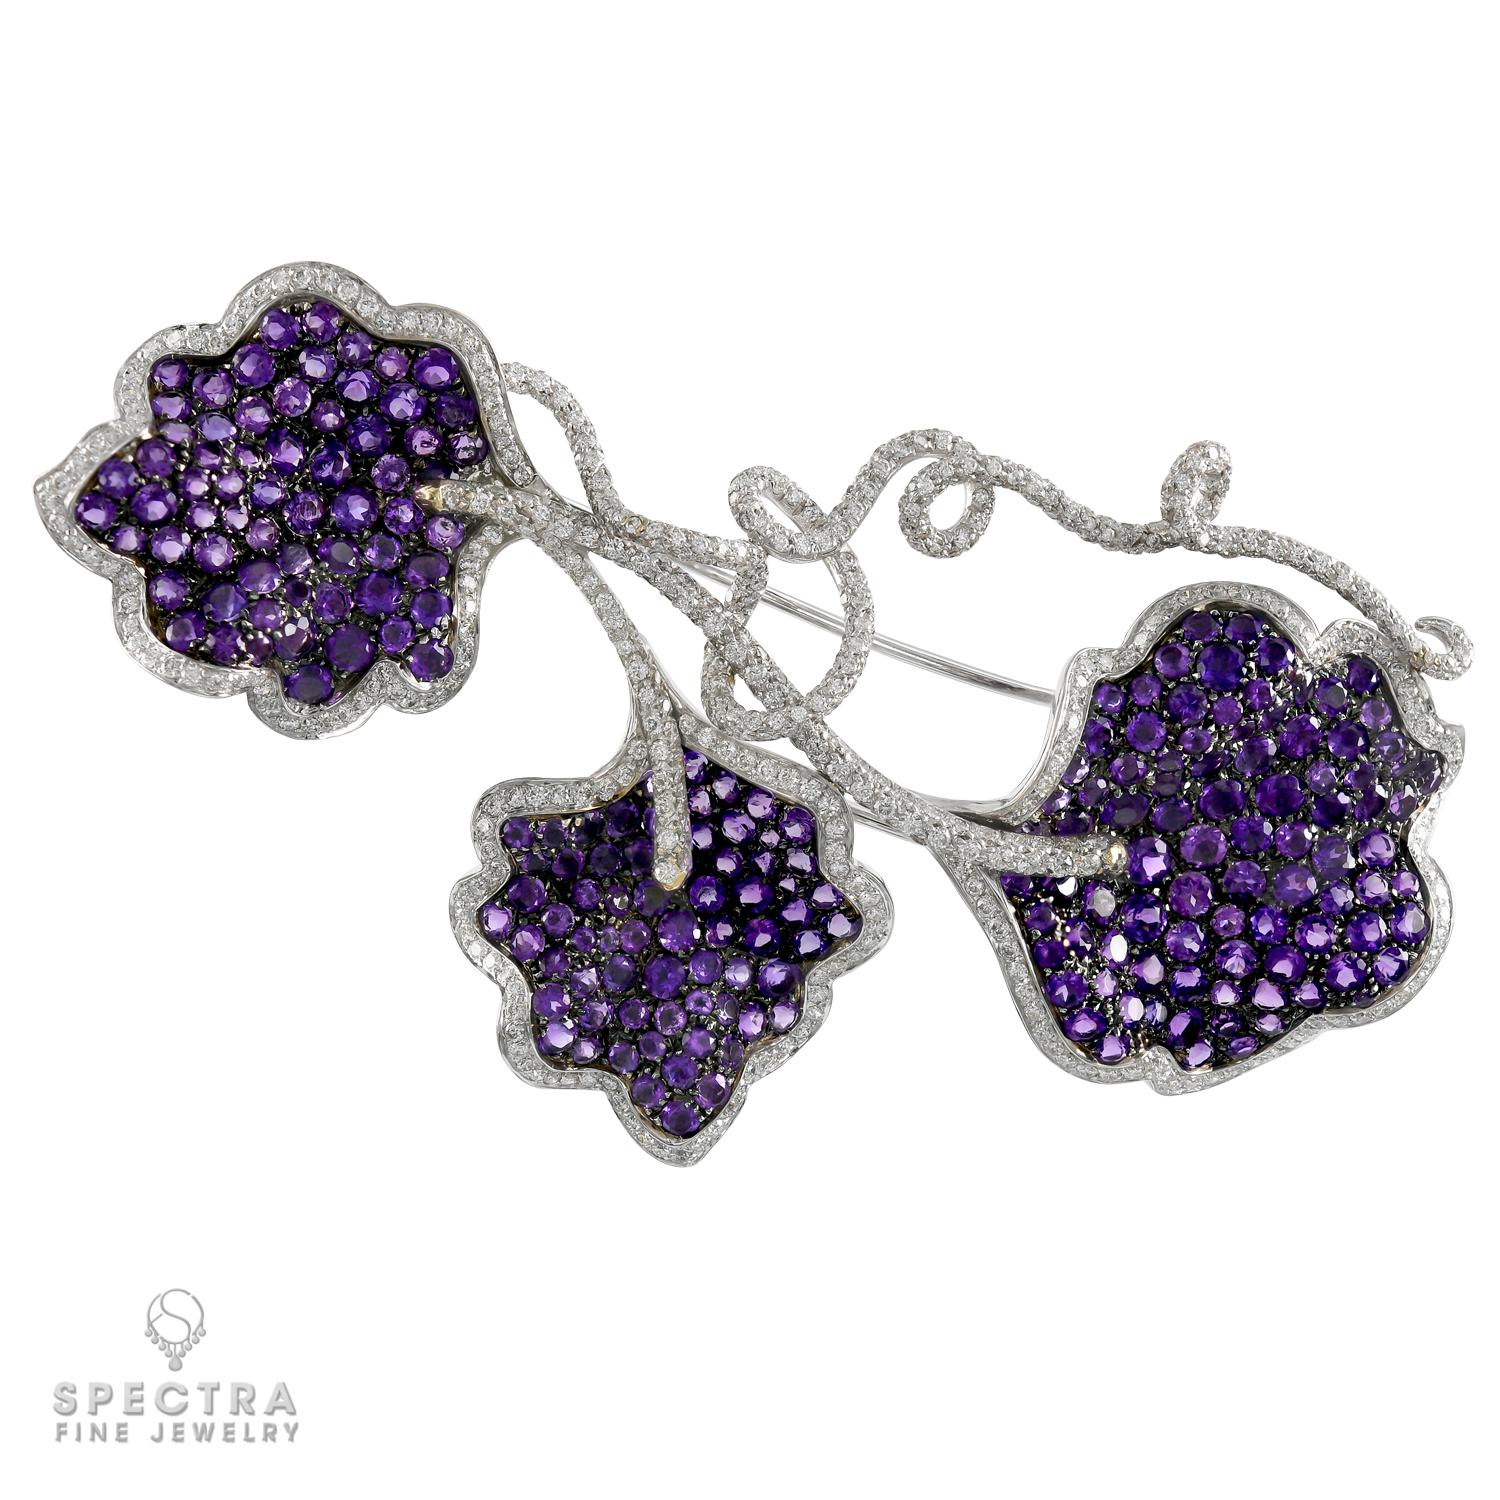 This charming De Ambrosi Contemporary Amethyst and Diamond Brooch made in Italy in the Contemporary Era, circa 2010s, makes one think of the refreshing shade under a trellised grape arbor in the heat of August. The pin features three unmistakable